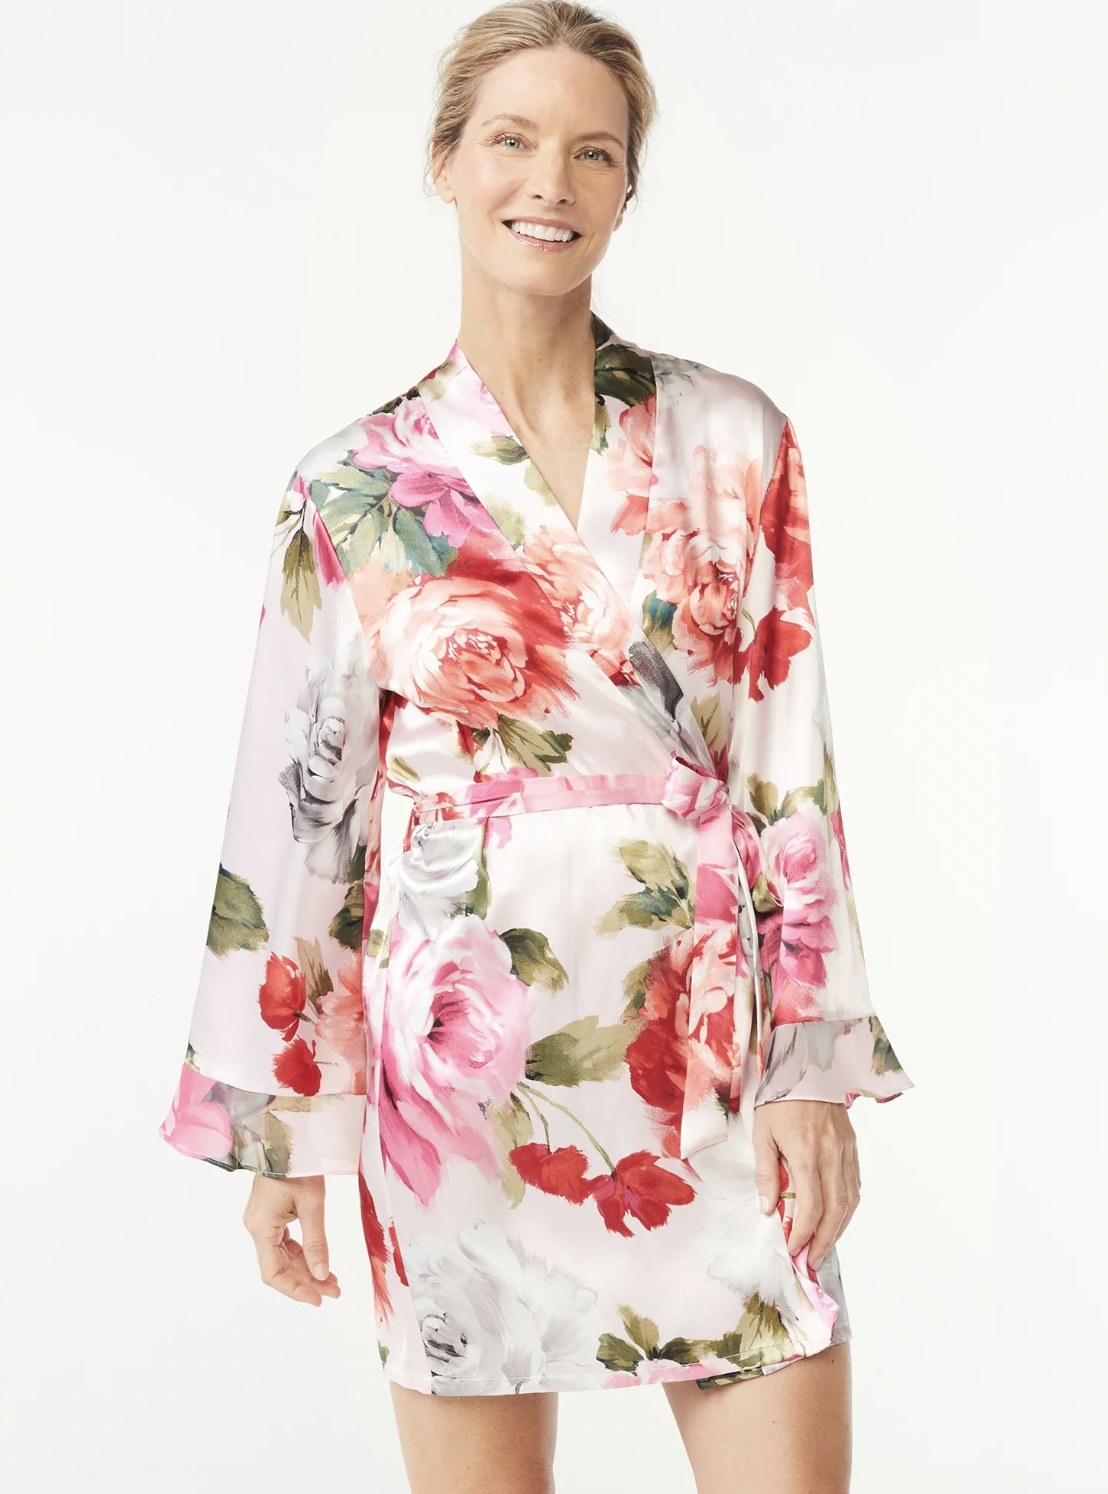 model in the shorts, long-sleeve floral robe